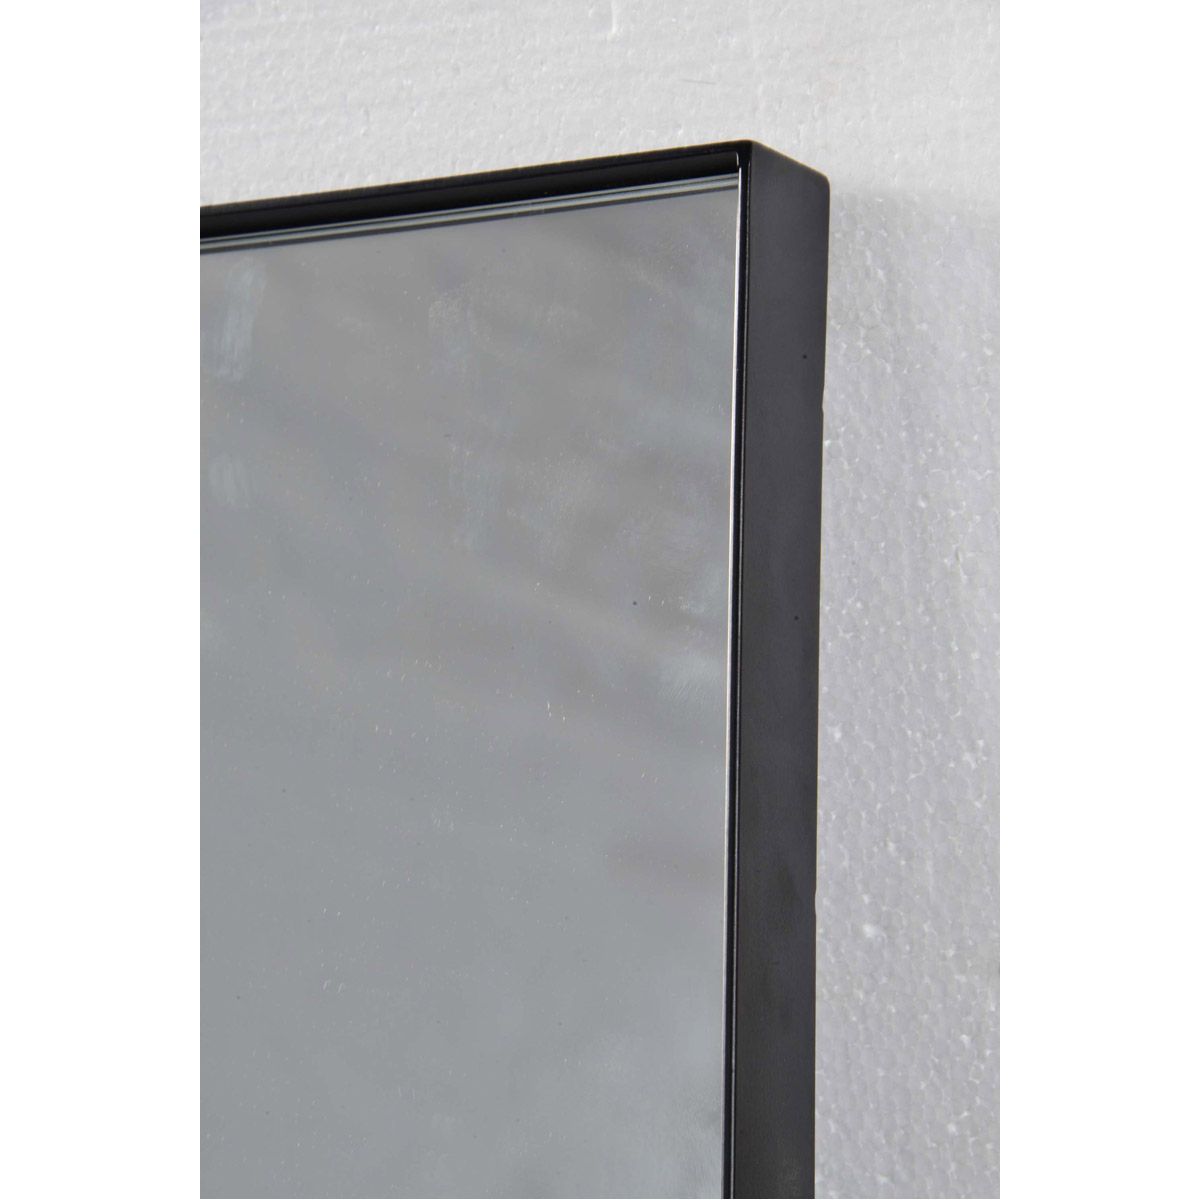 Renwil Mt2097 Greer 36 X 36 Inch Black Wall Mirror, Medium Square | Ebay Within Matte Black Square Wall Mirrors (View 6 of 15)